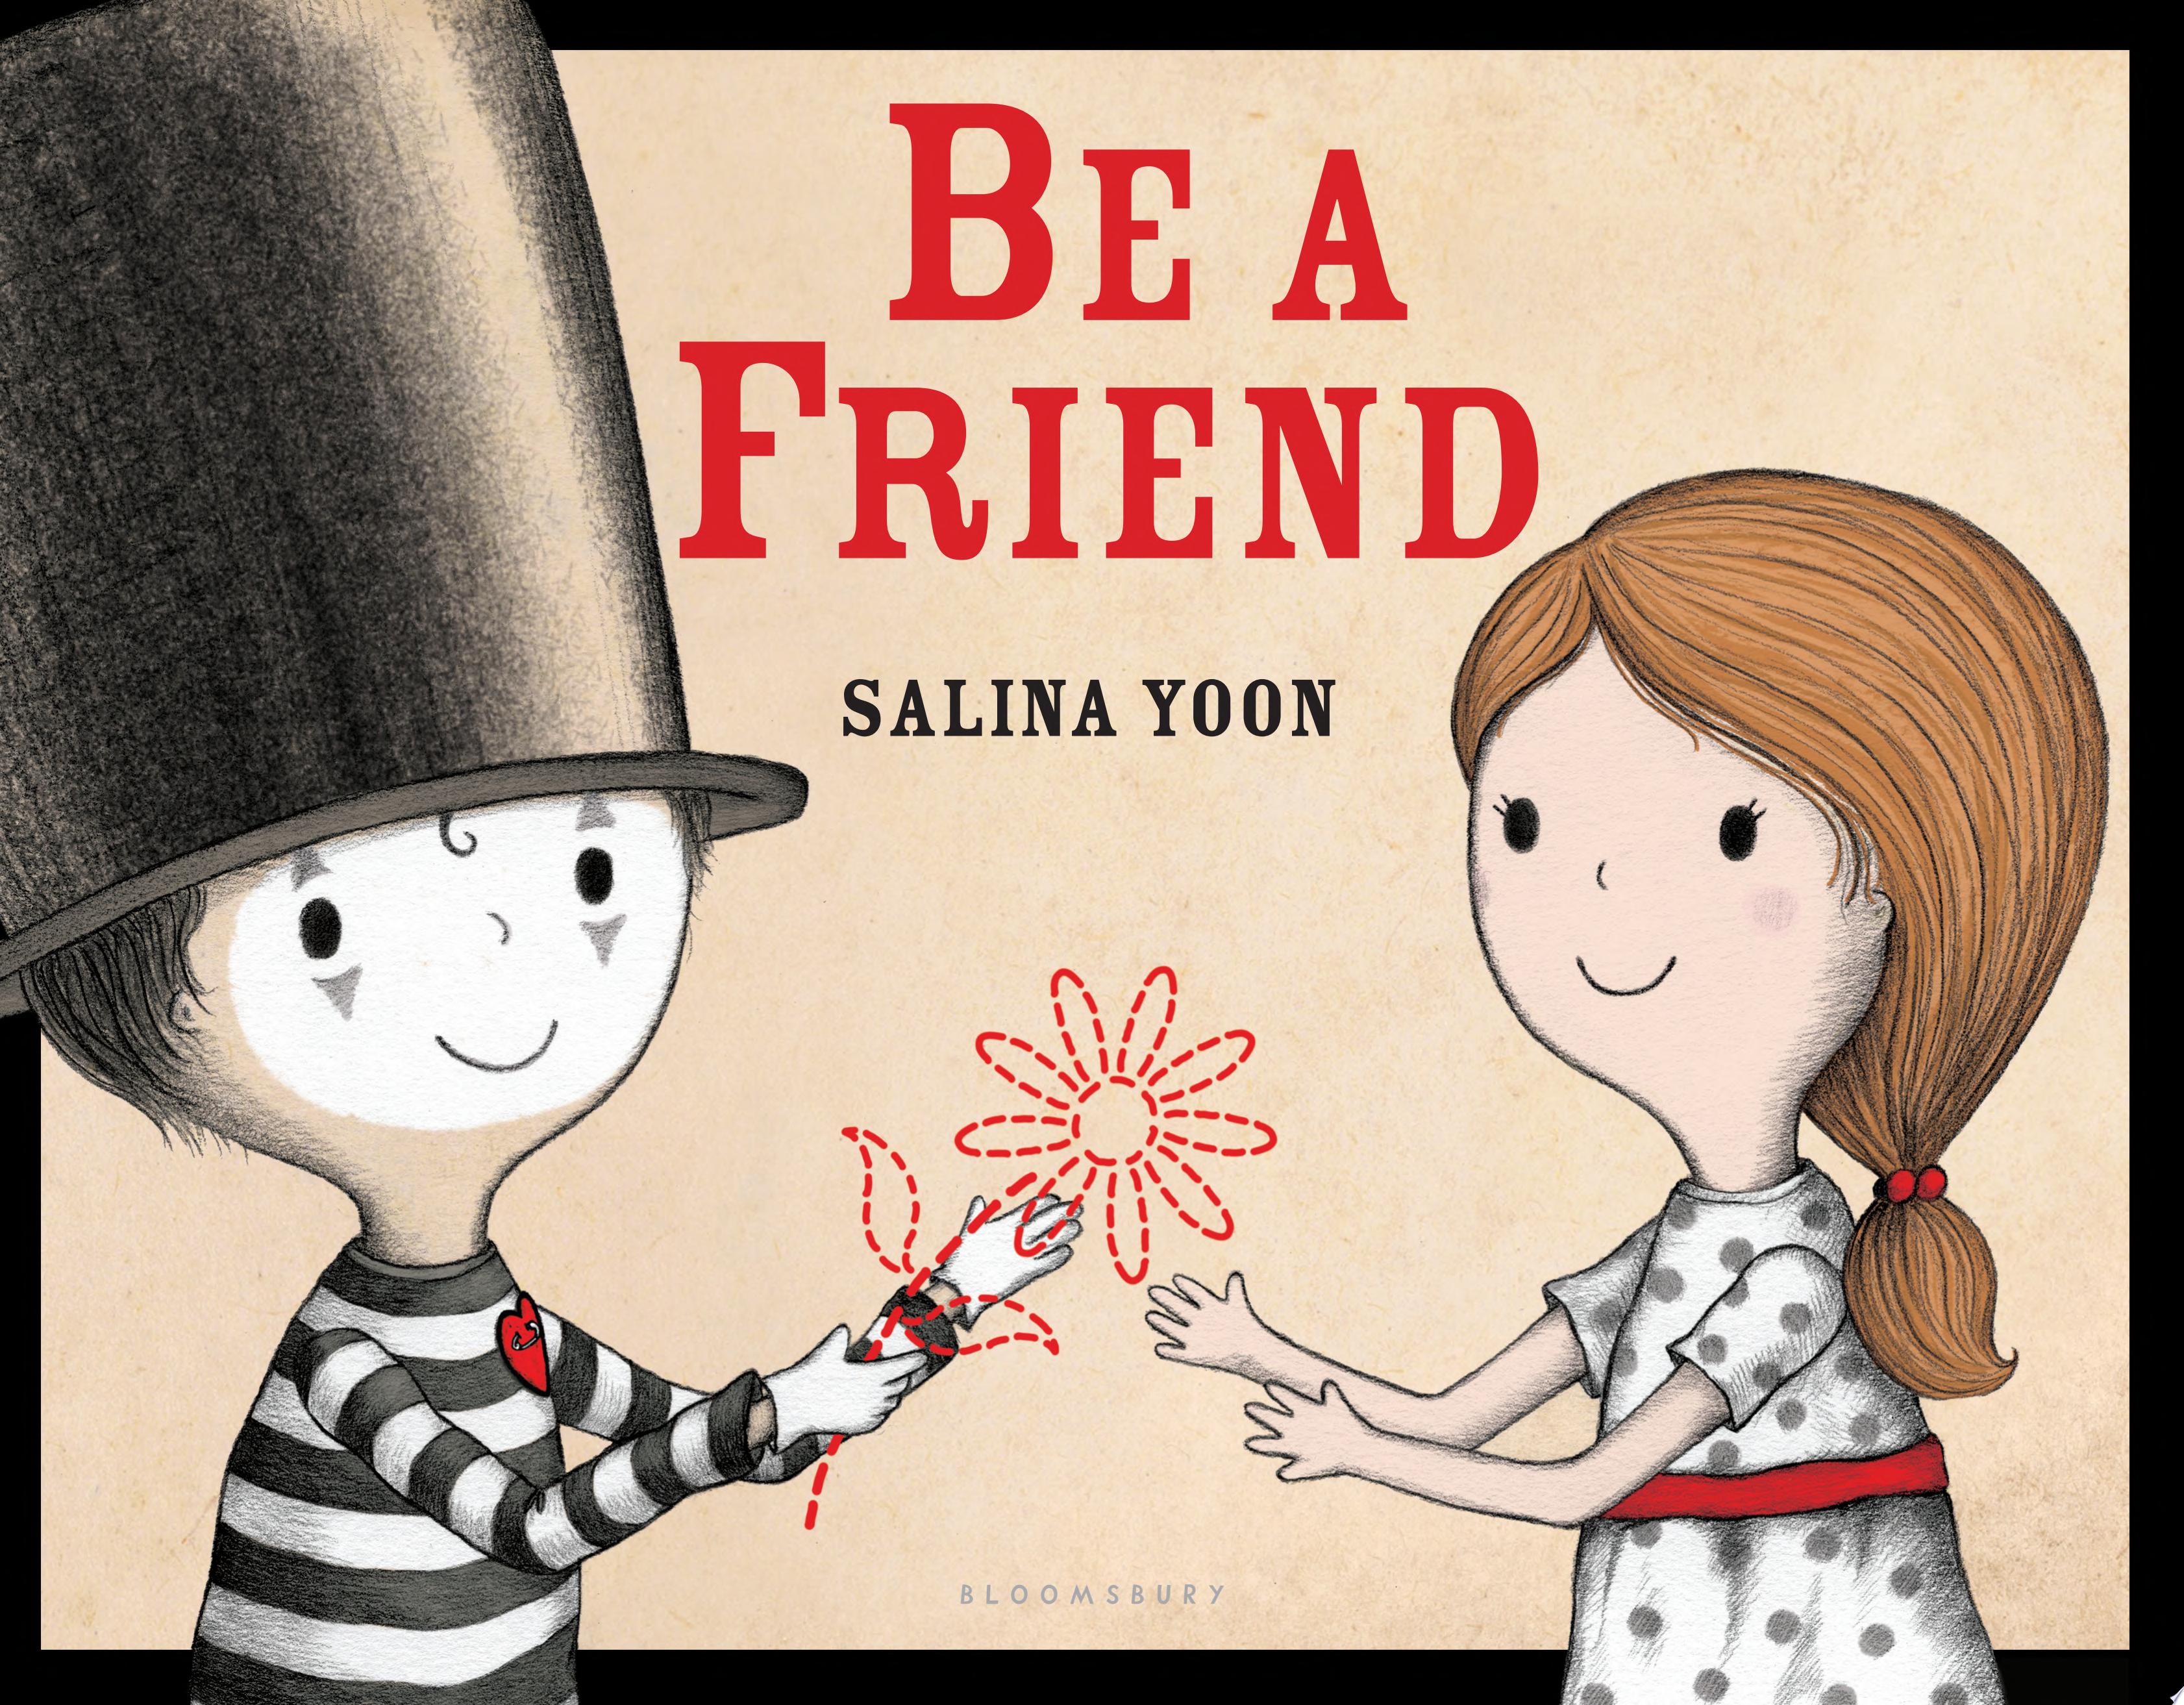 Image for "Be a Friend"